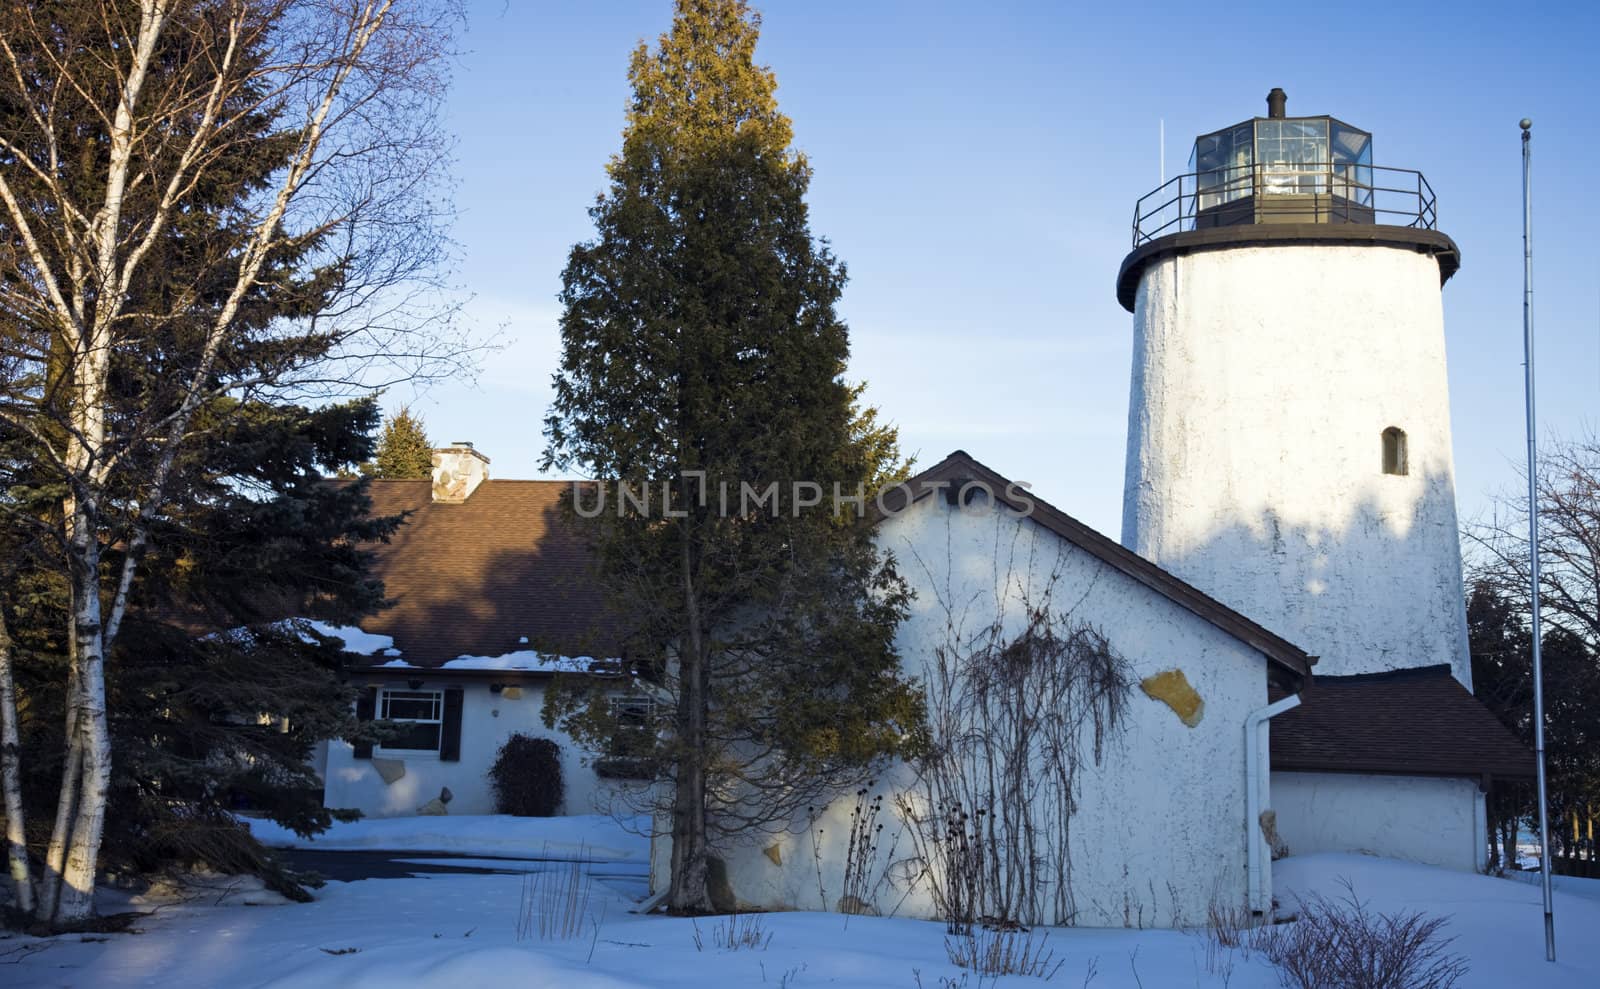 Kevich Lighthouse - seen during the winter afternoon.